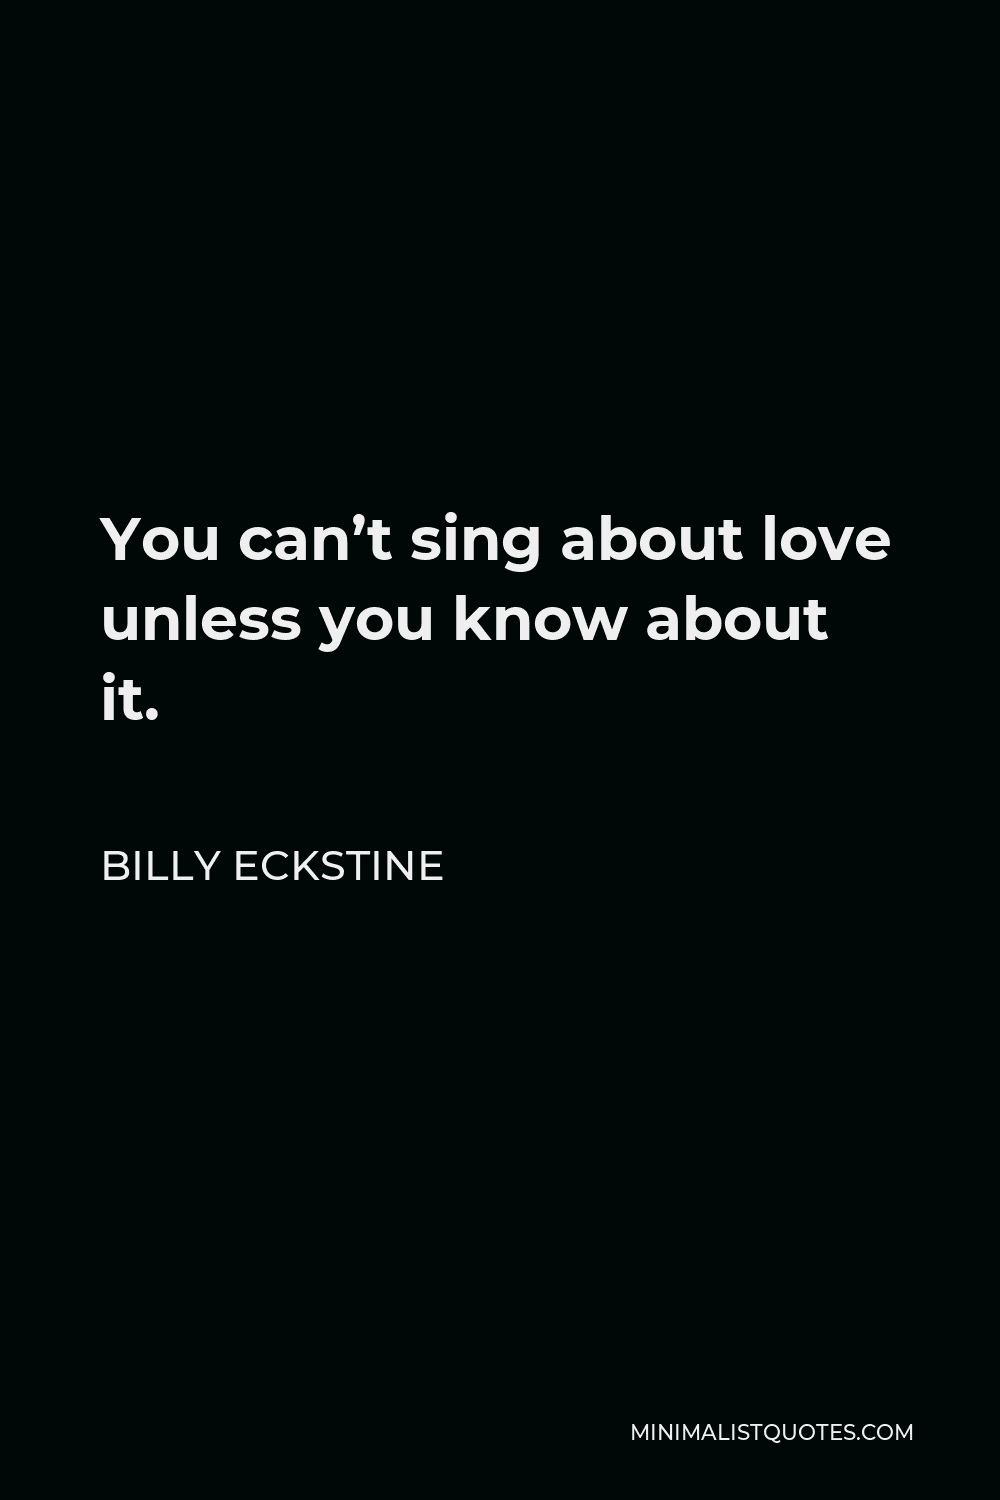 Billy Eckstine Quote - You can’t sing about love unless you know about it.